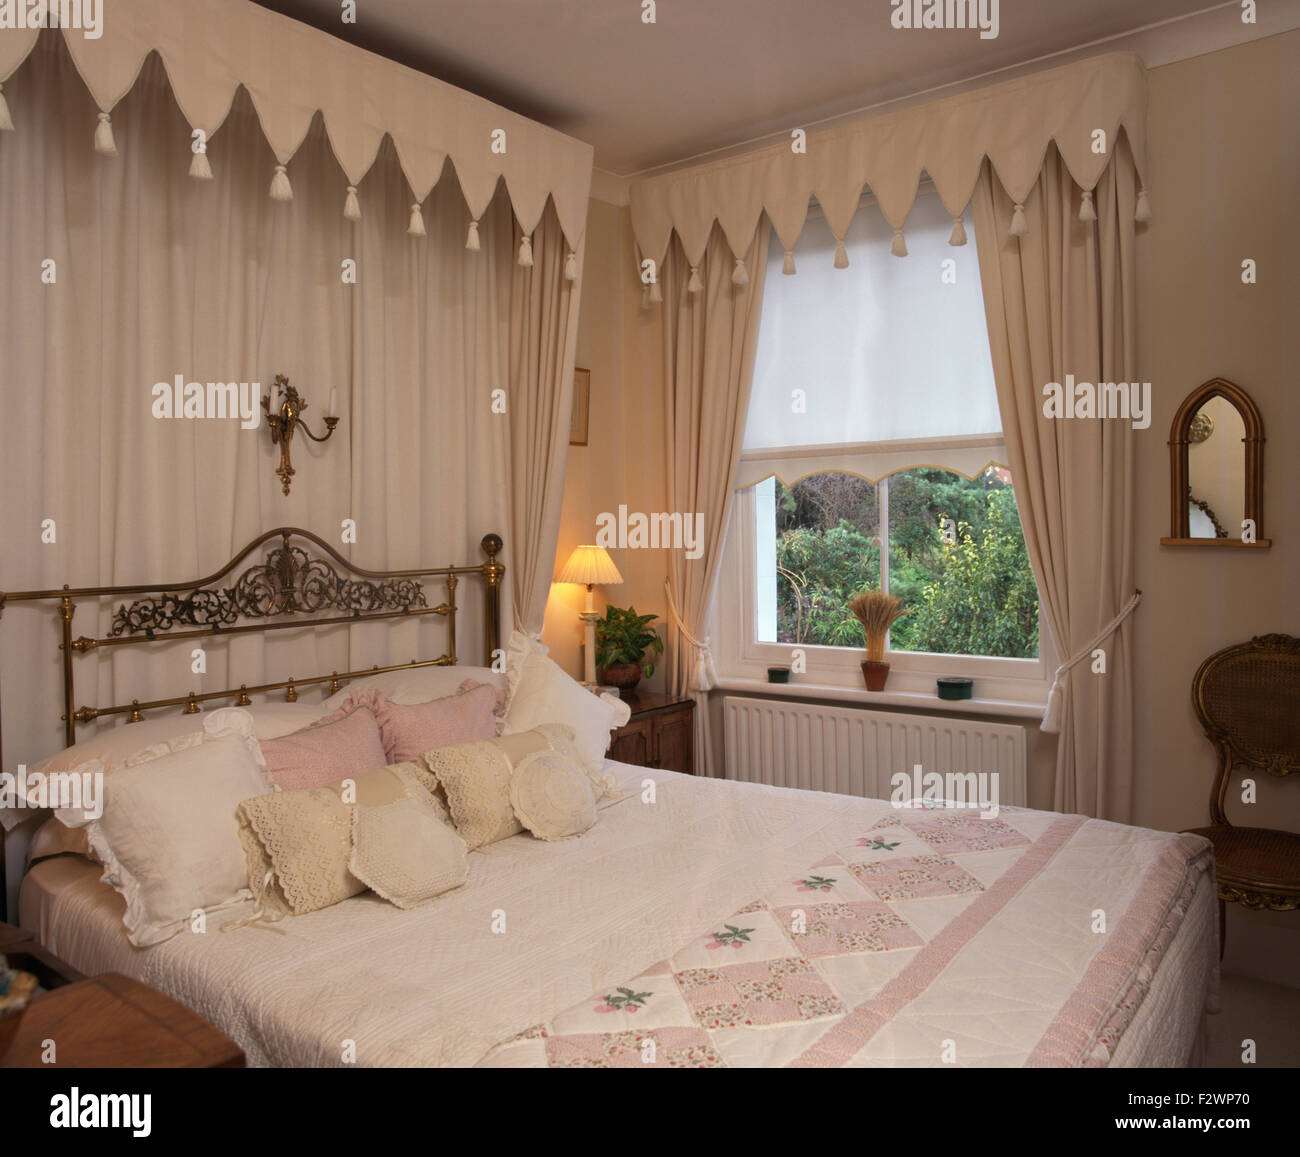 Gothic style canopy and drapes above brass bed in townhouse bedroom with cream curtains and pelmet Stock Photo